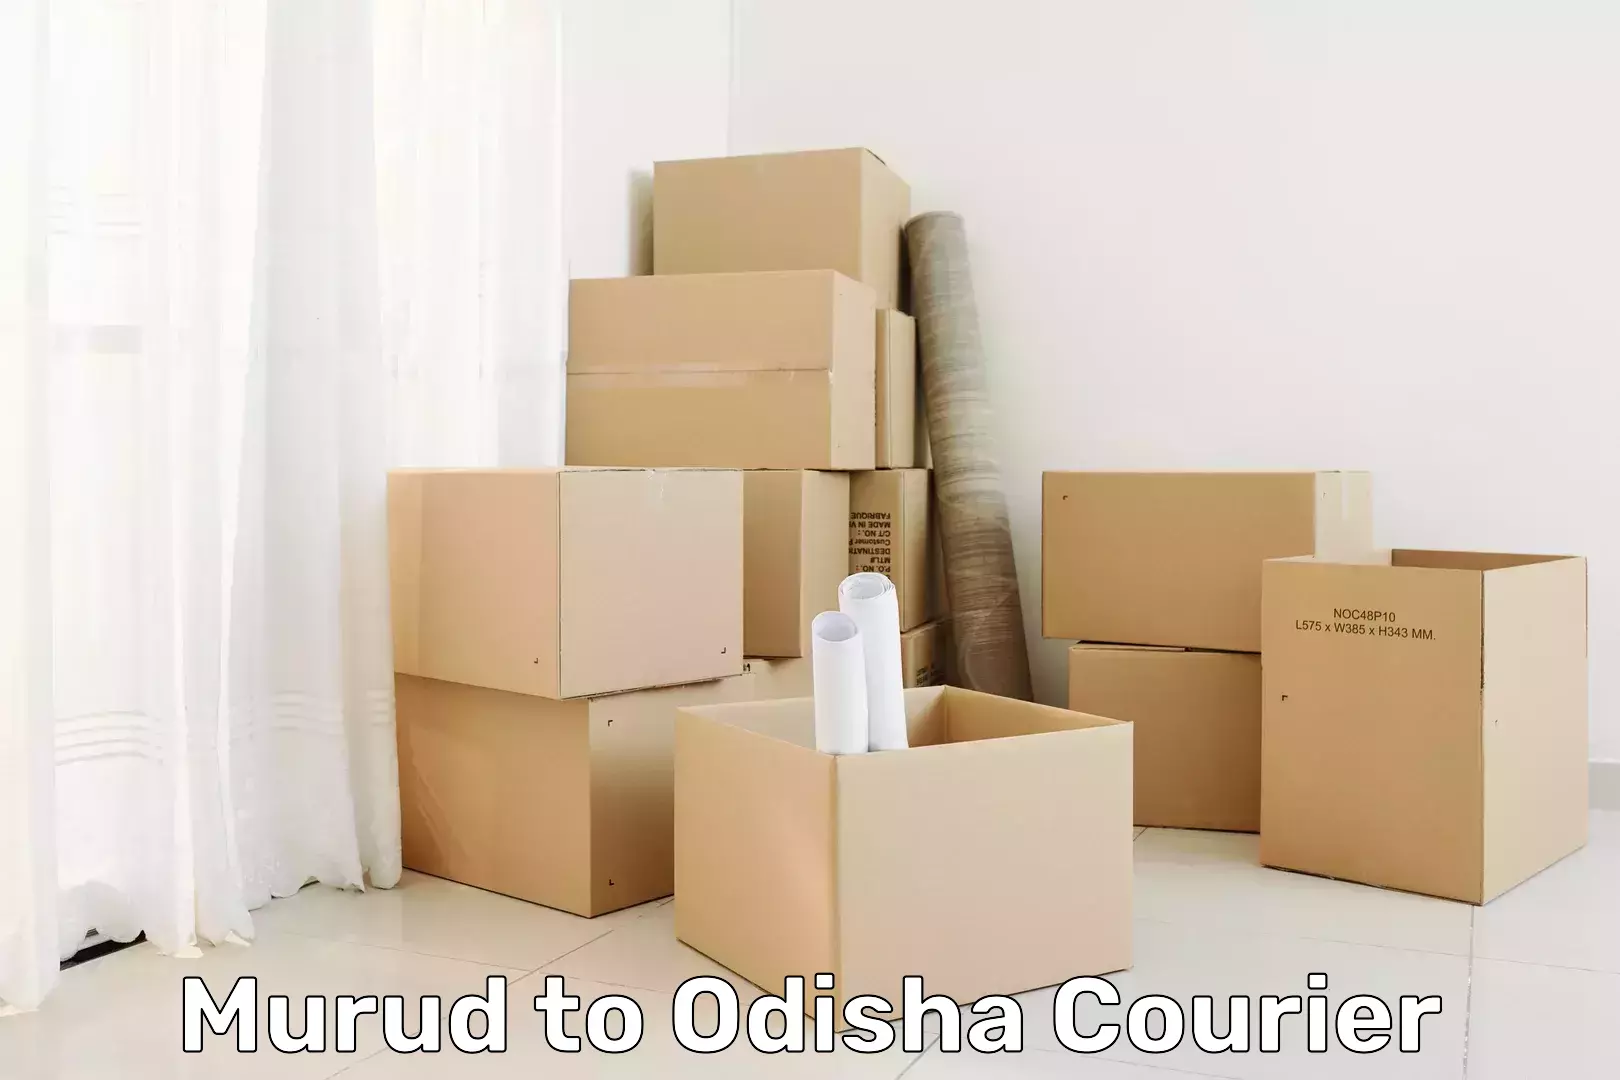 State-of-the-art courier technology in Murud to Sambalpur